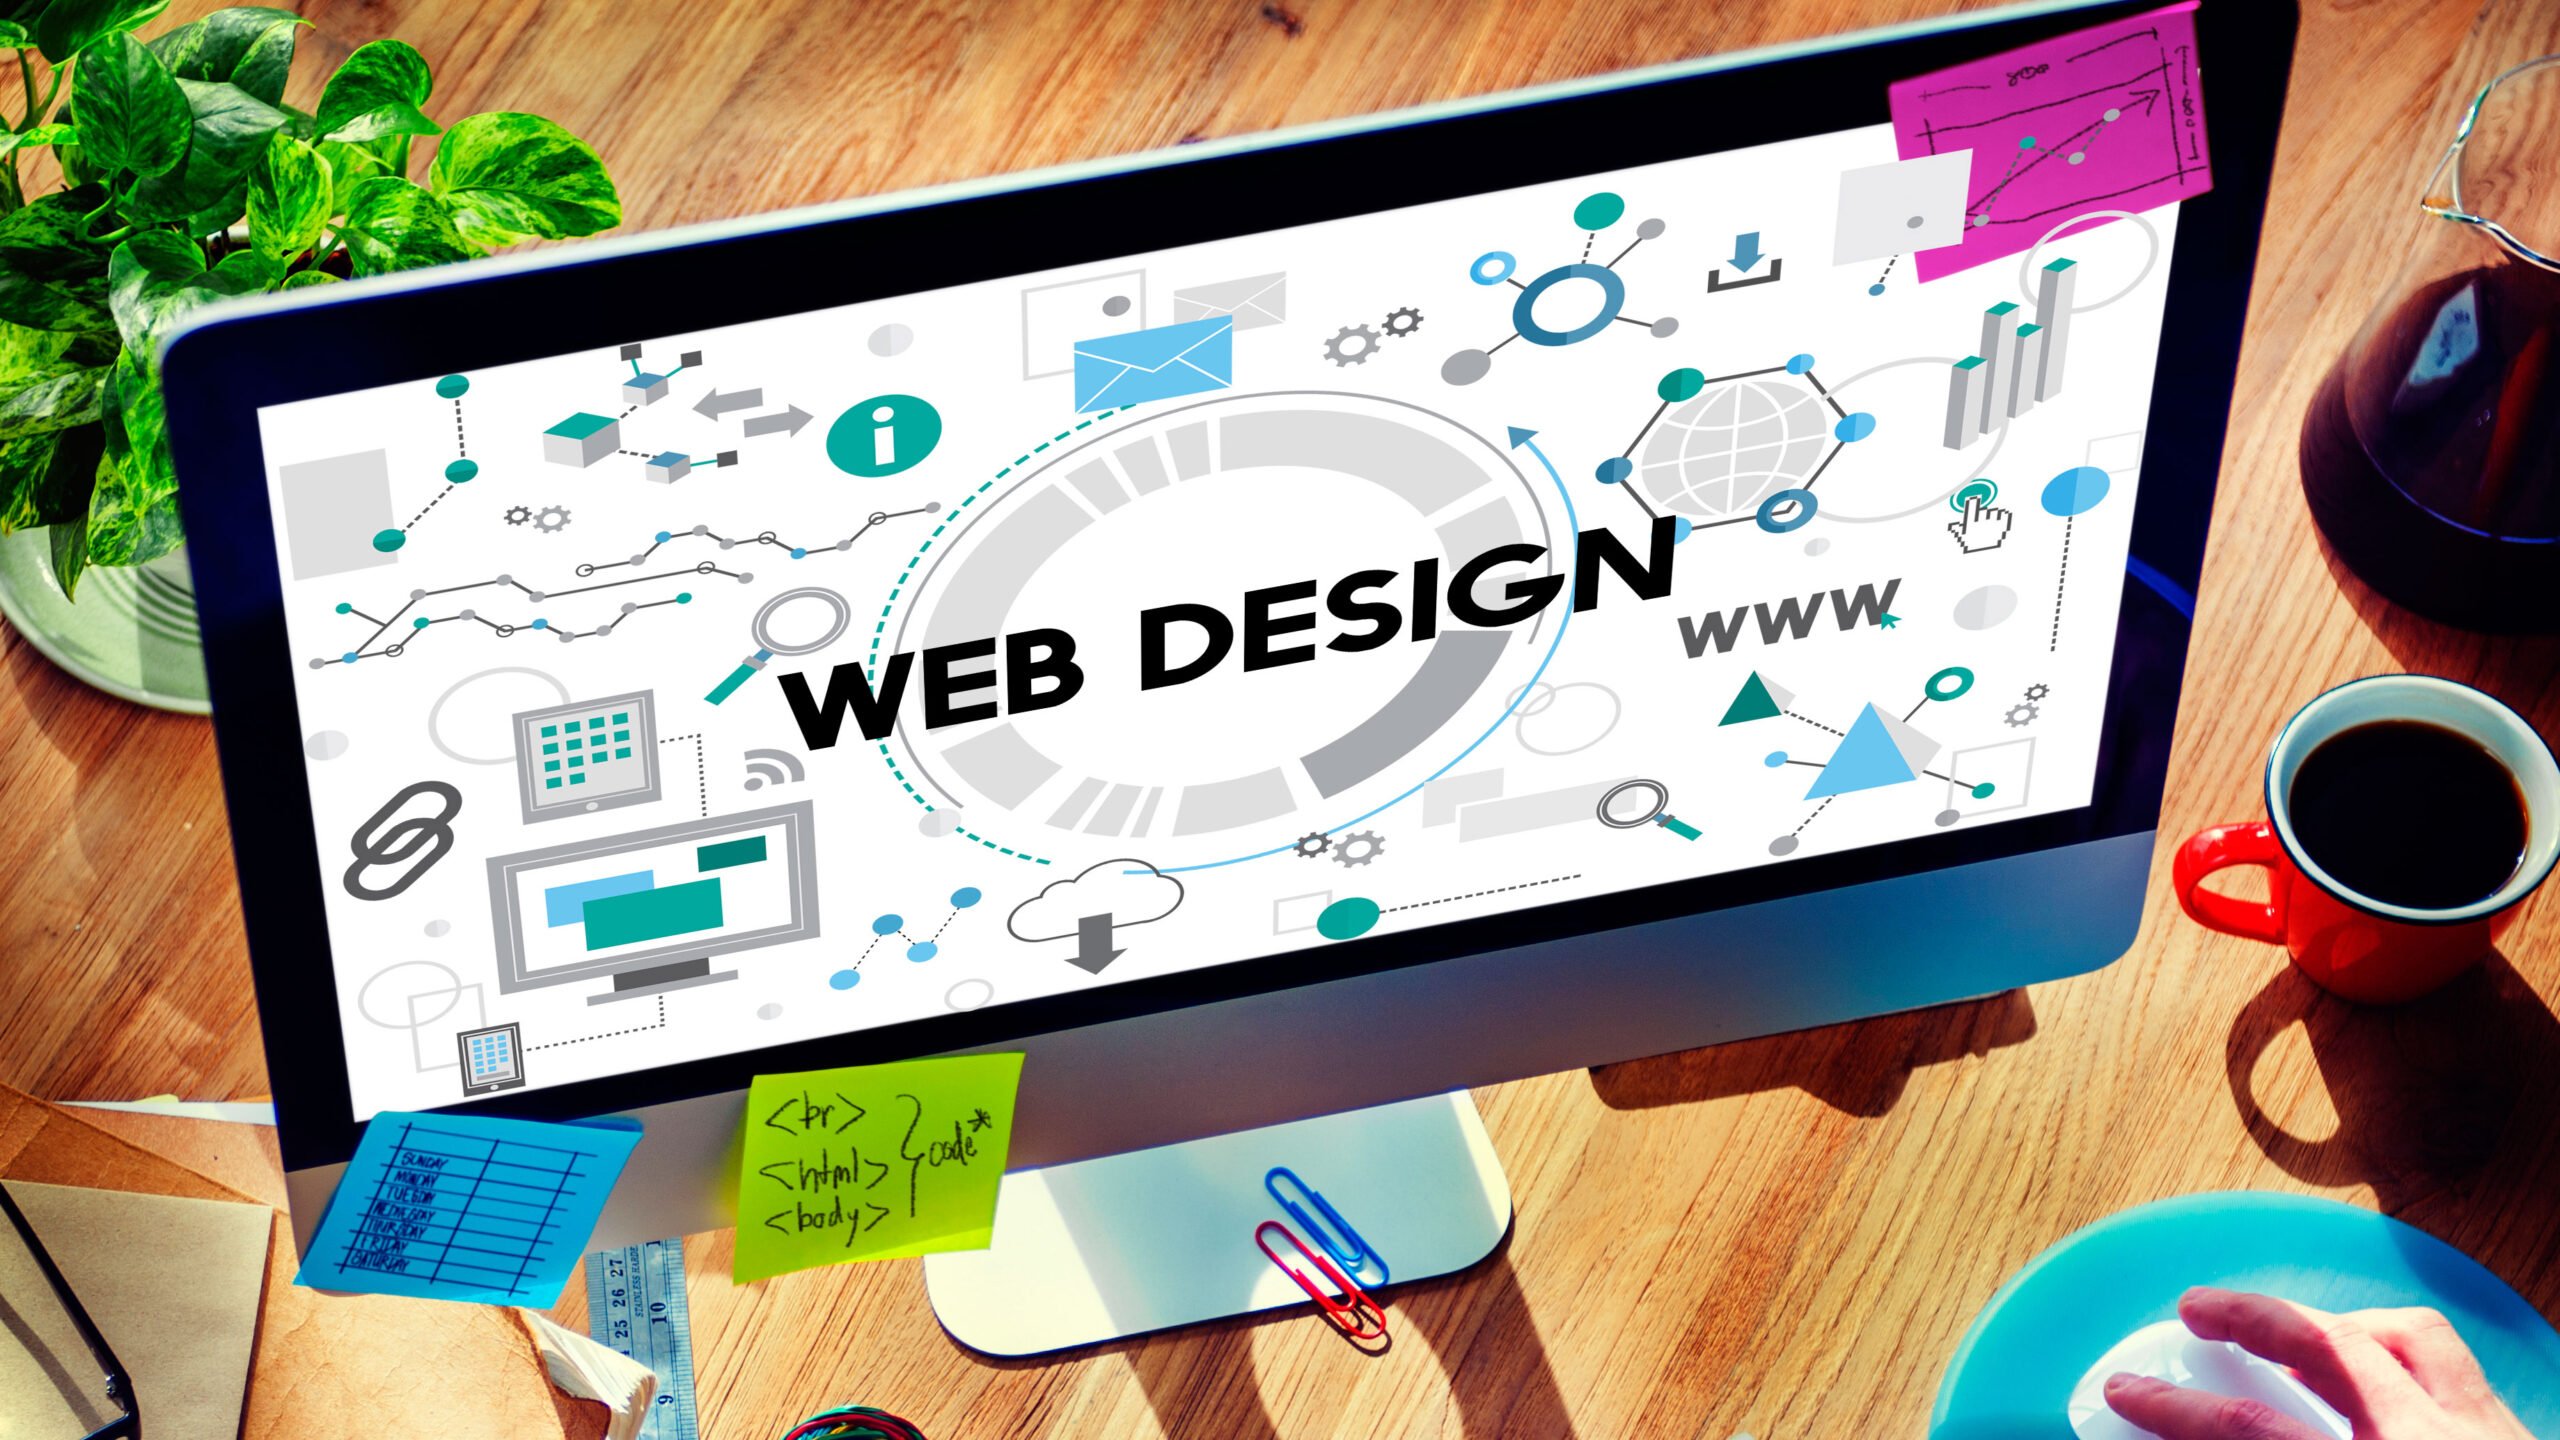 You’ll Need These Skills and Tools for Efficient Web Design